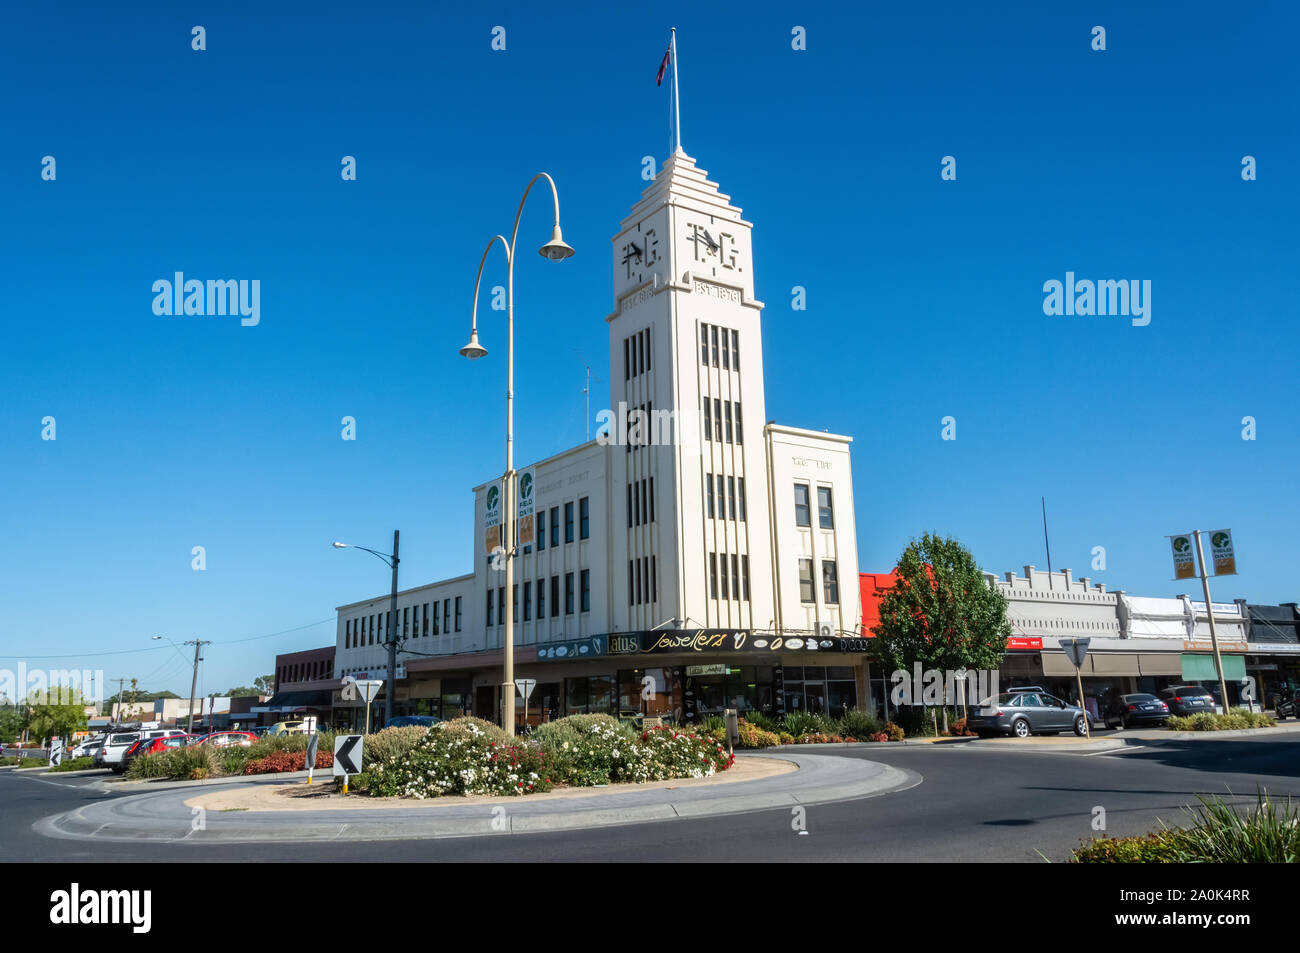 Horsham, Victoria, Australia - March 4, 2017. Exterior view of historic T&G Building in Horsham, VIC, across a roundabout. Stock Photo